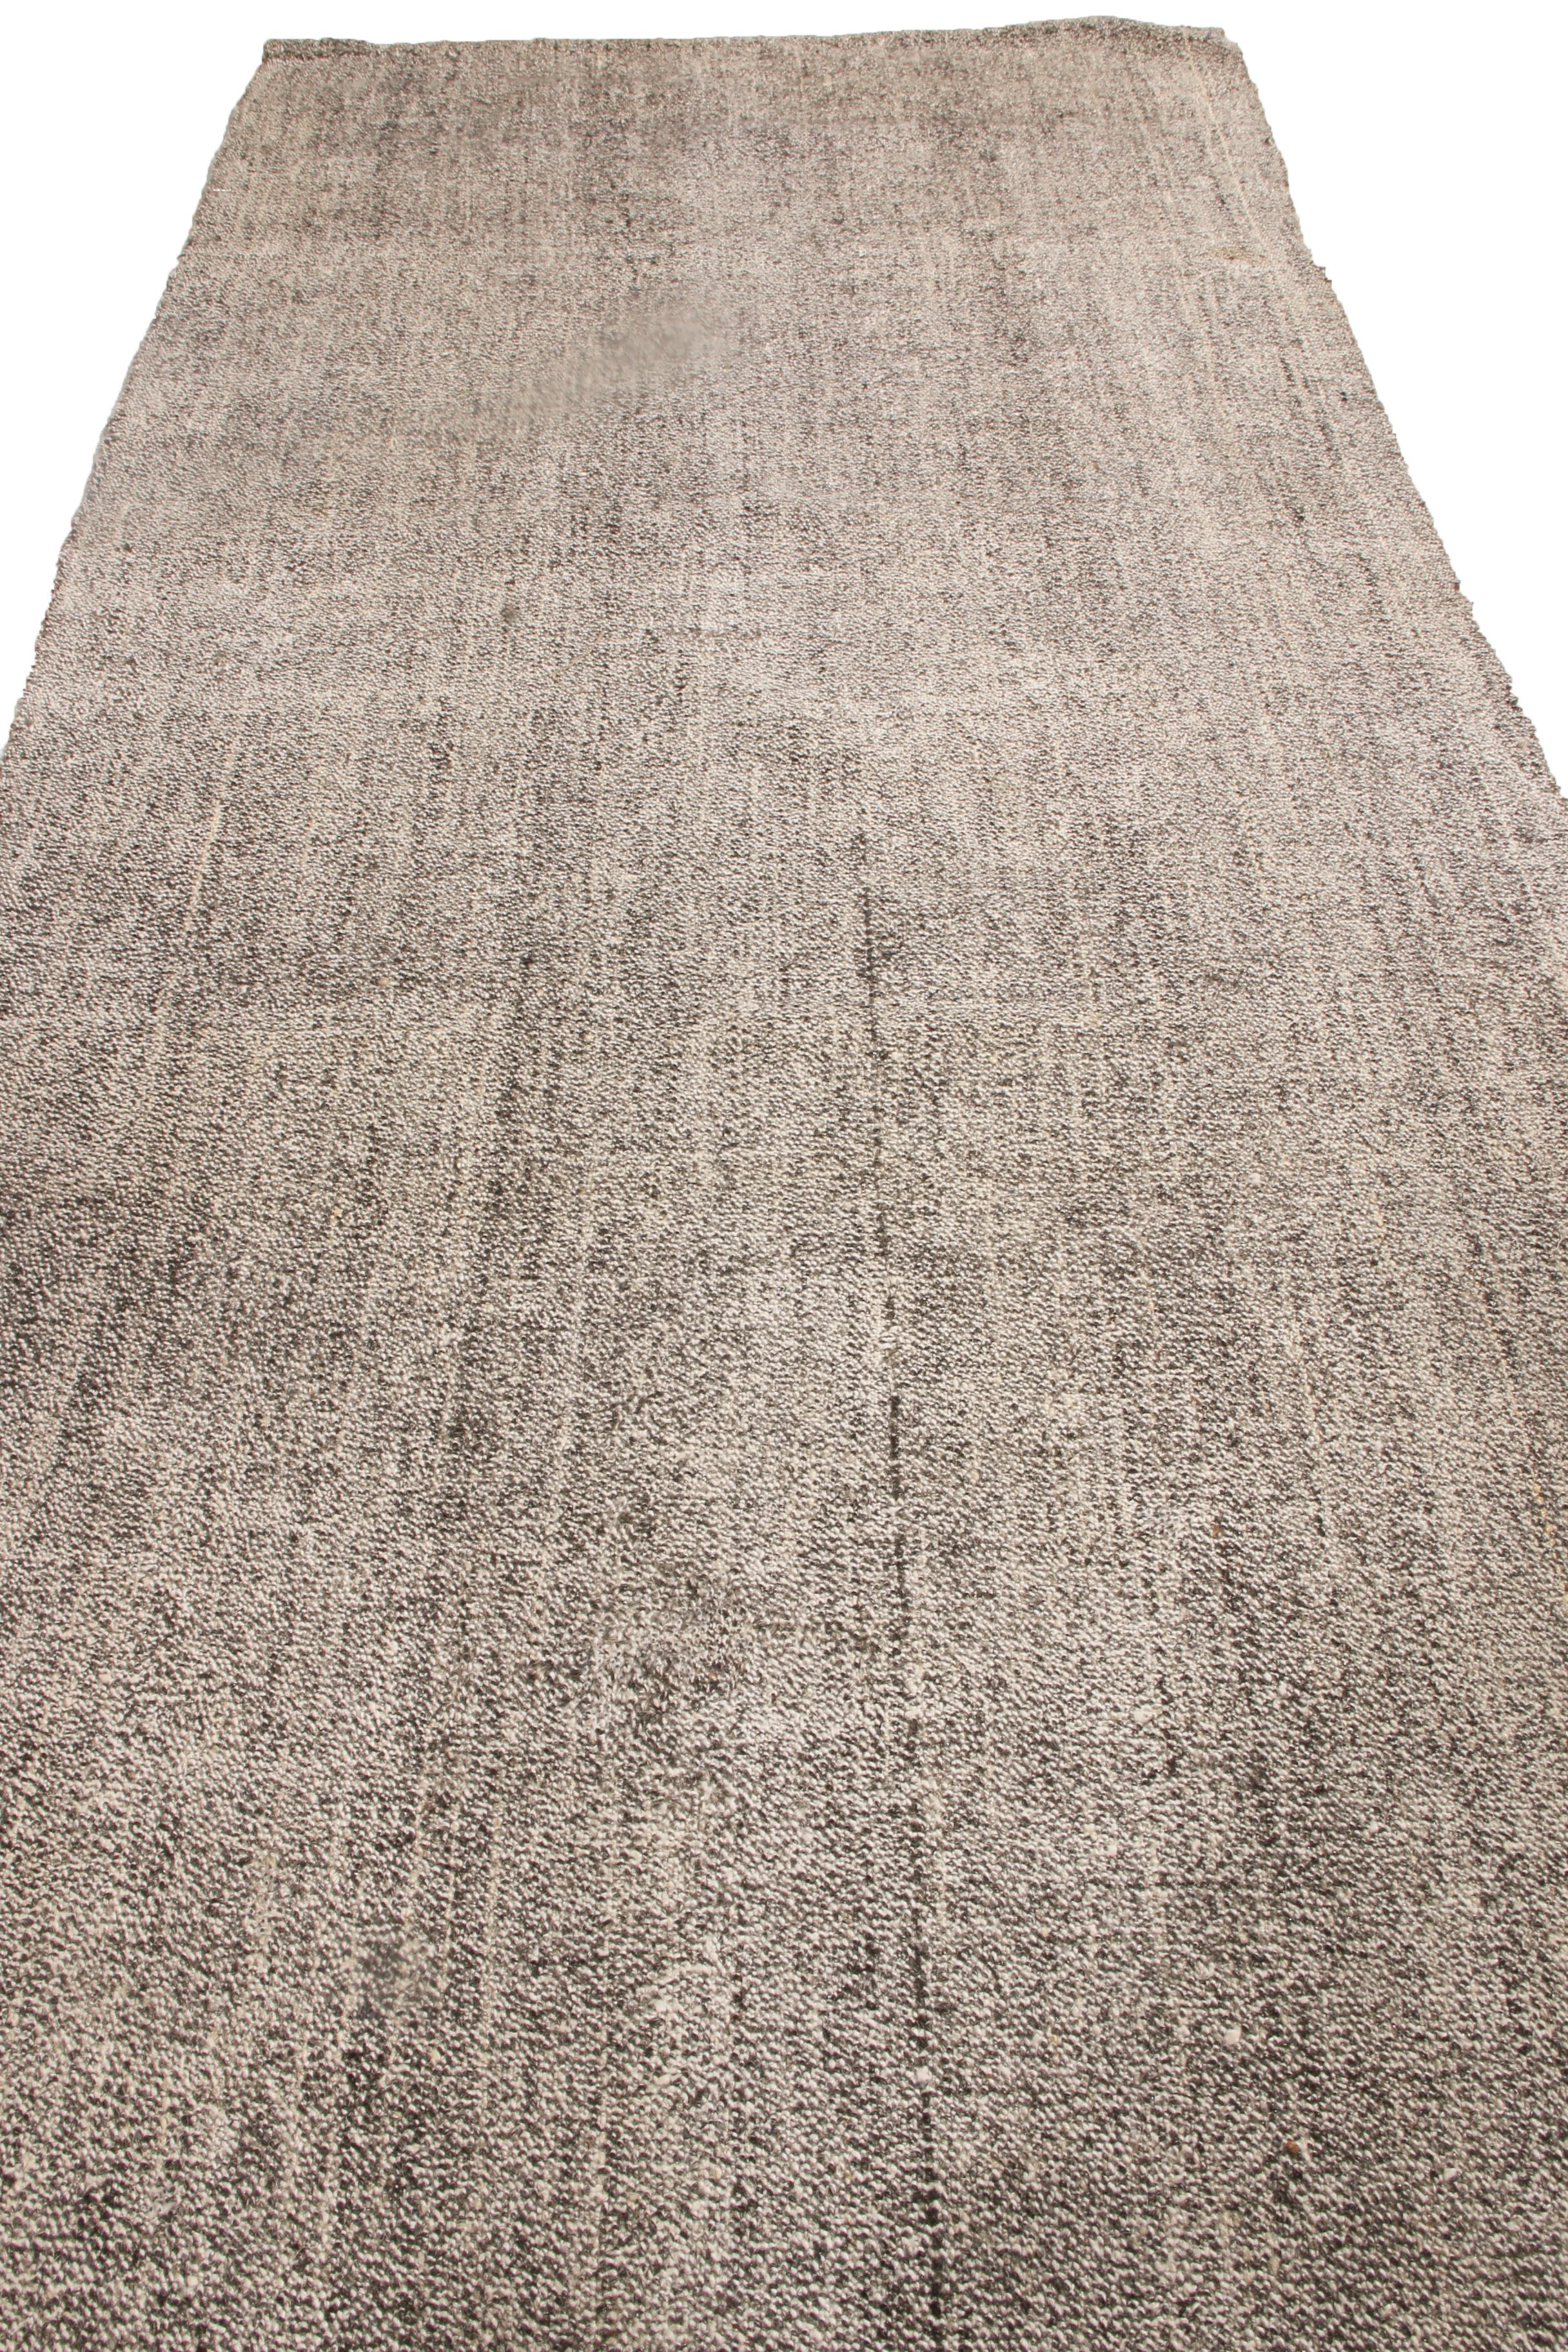 Hand-Knotted Vintage Turkish Silver Gray Wool Kilim Runner